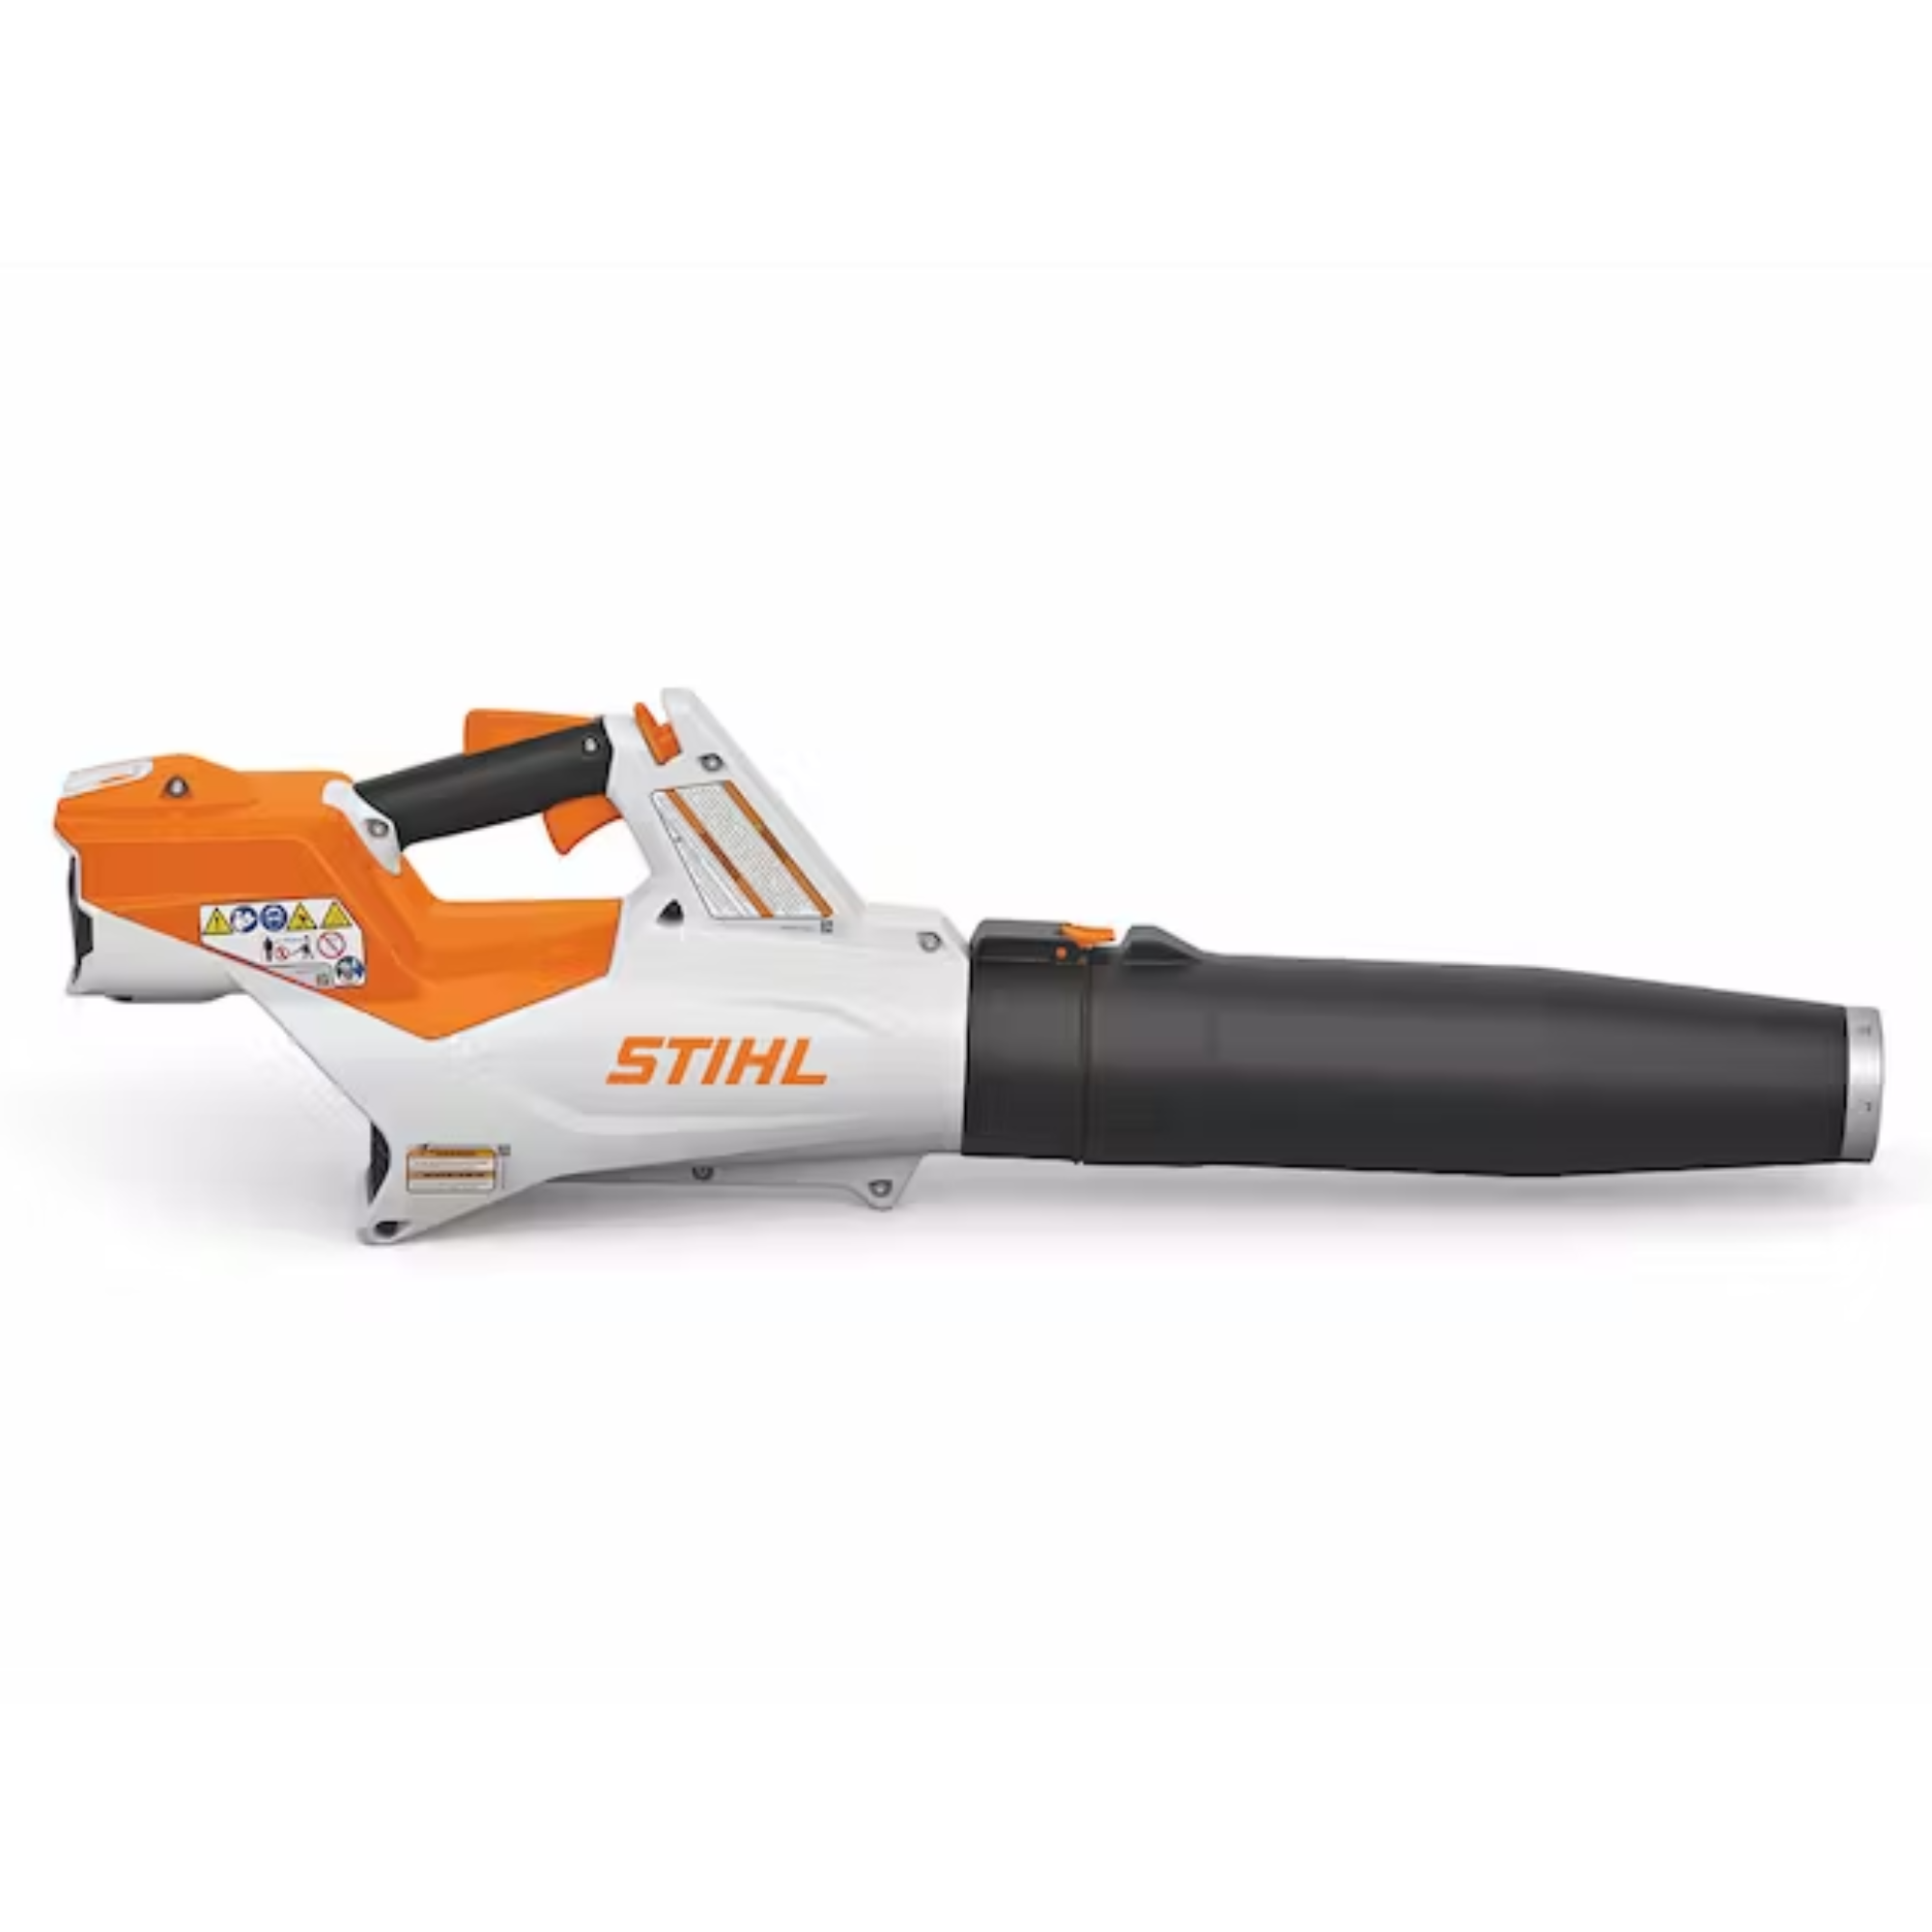 Stihl BGA 60 Battery Powered Handheld Blower with Battery & Charger